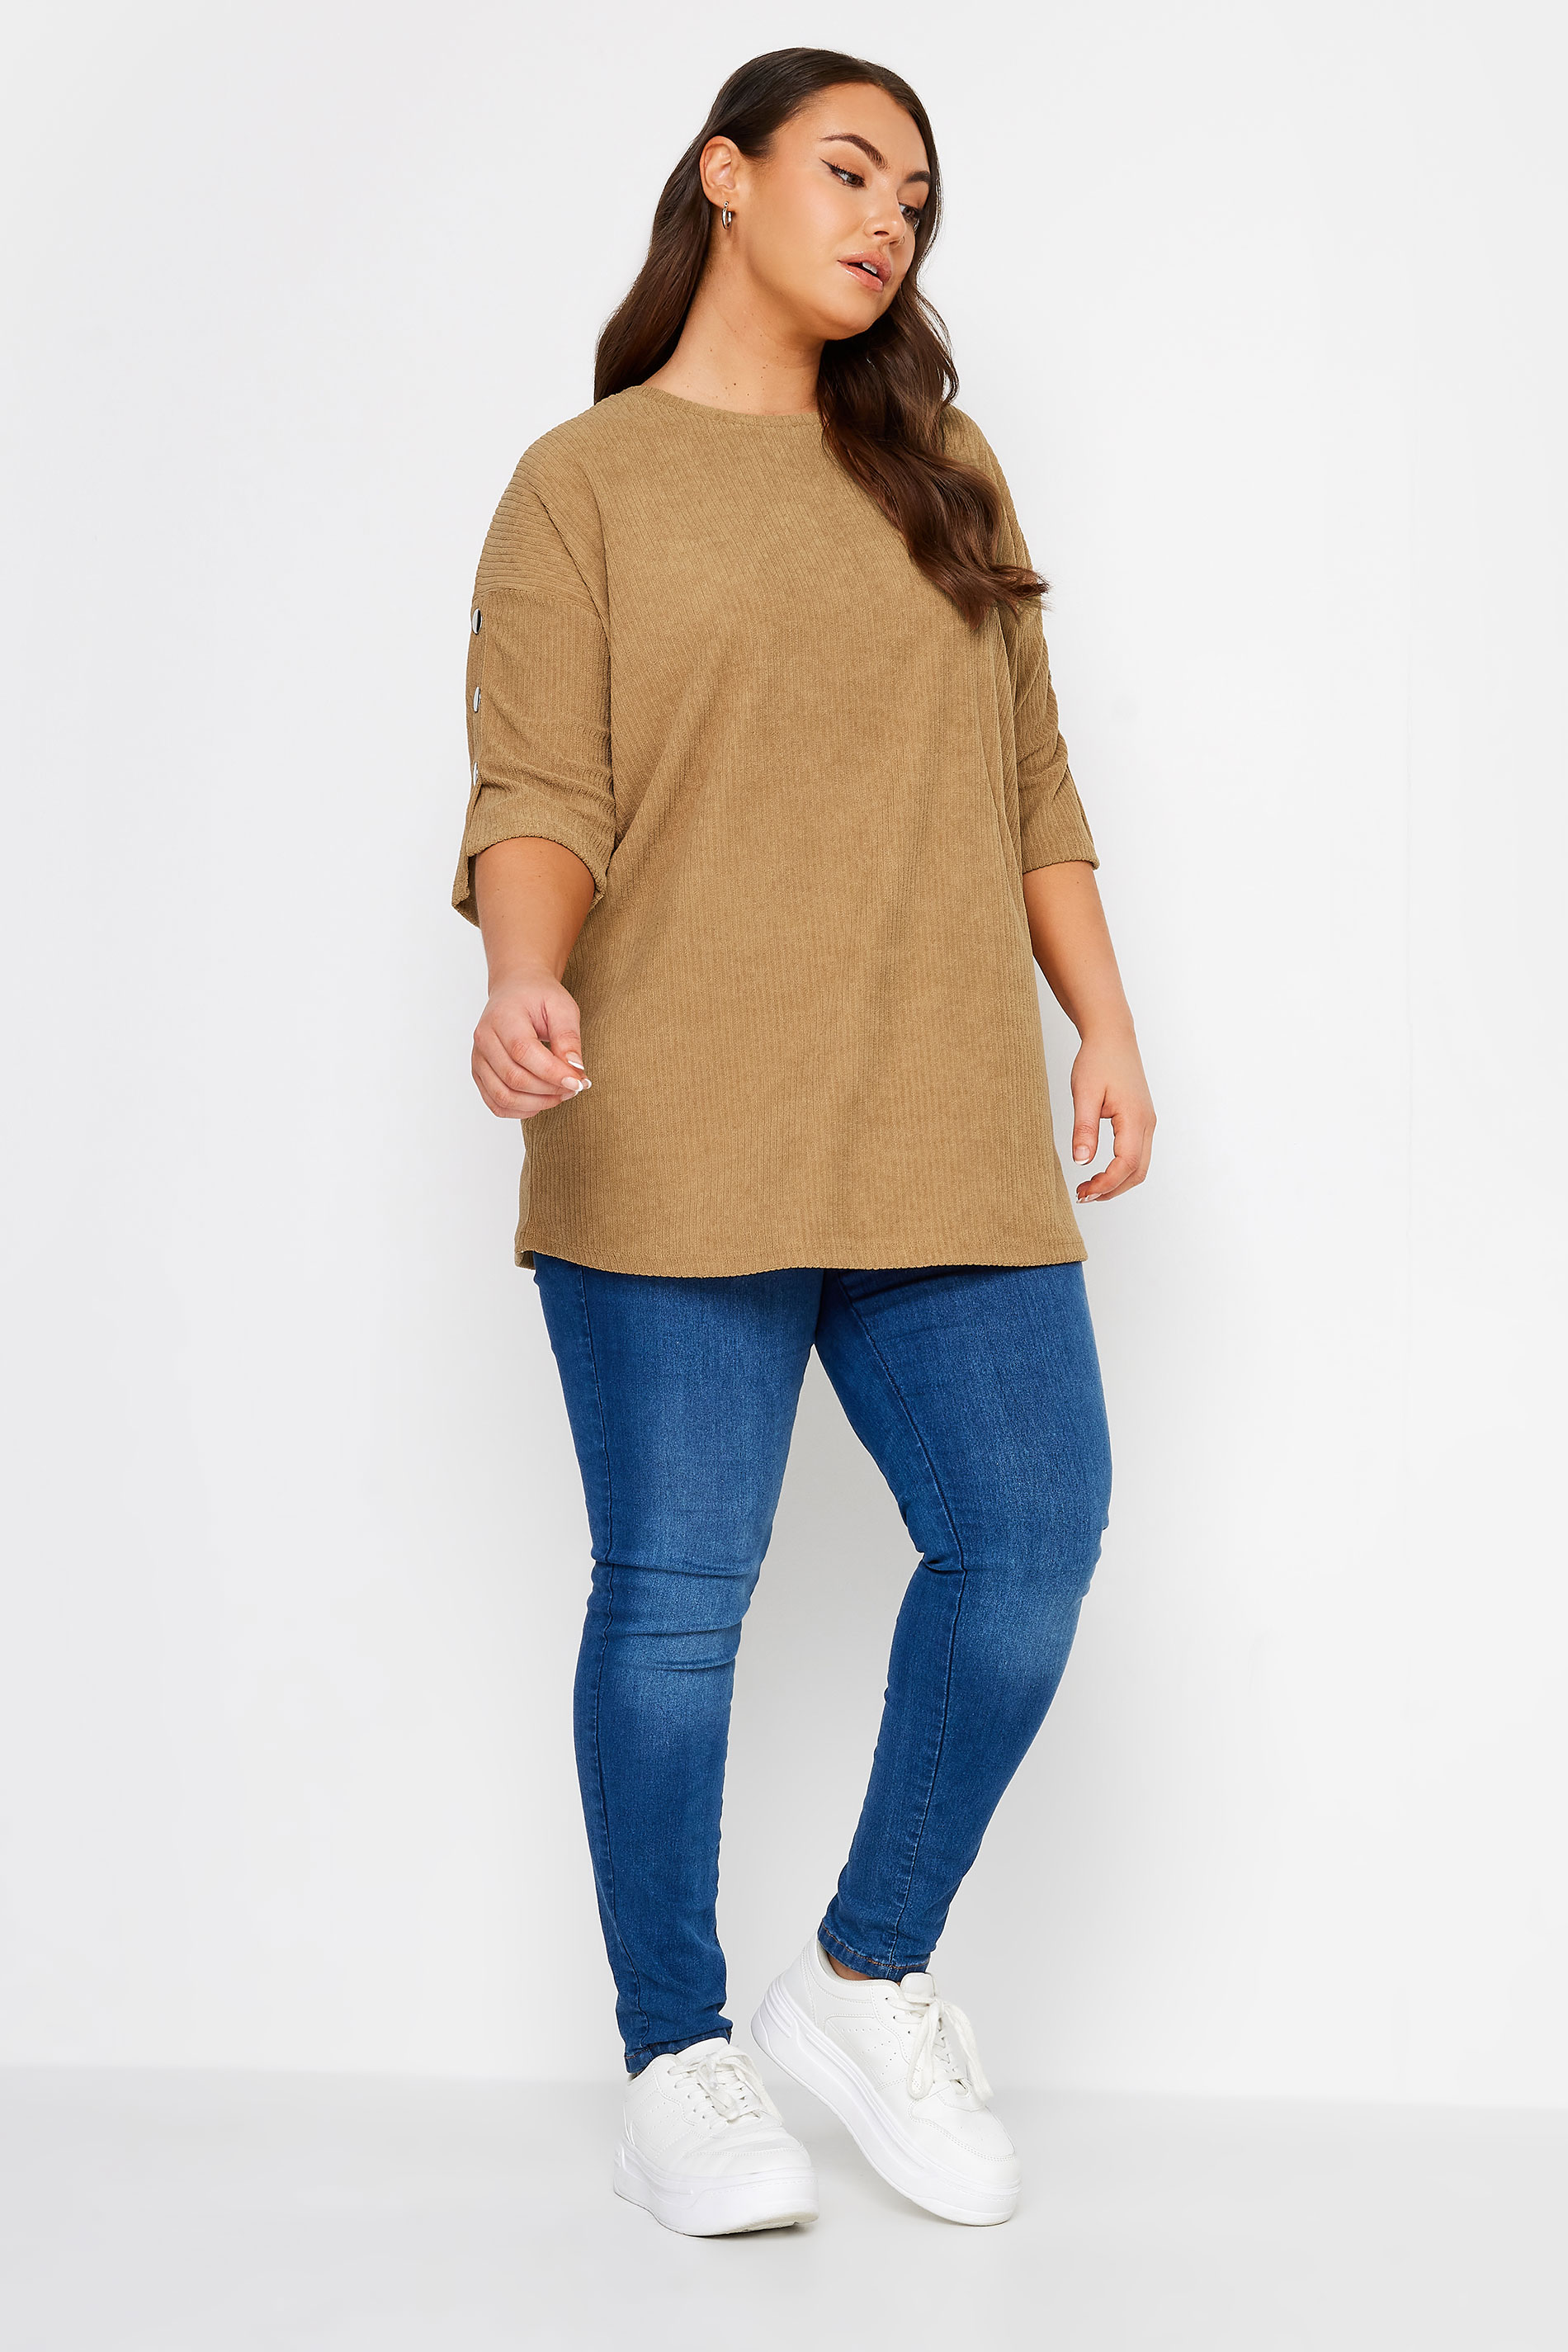 YOURS Plus Size Beige Brown Soft Touch Button Top | Yours Clothing 2